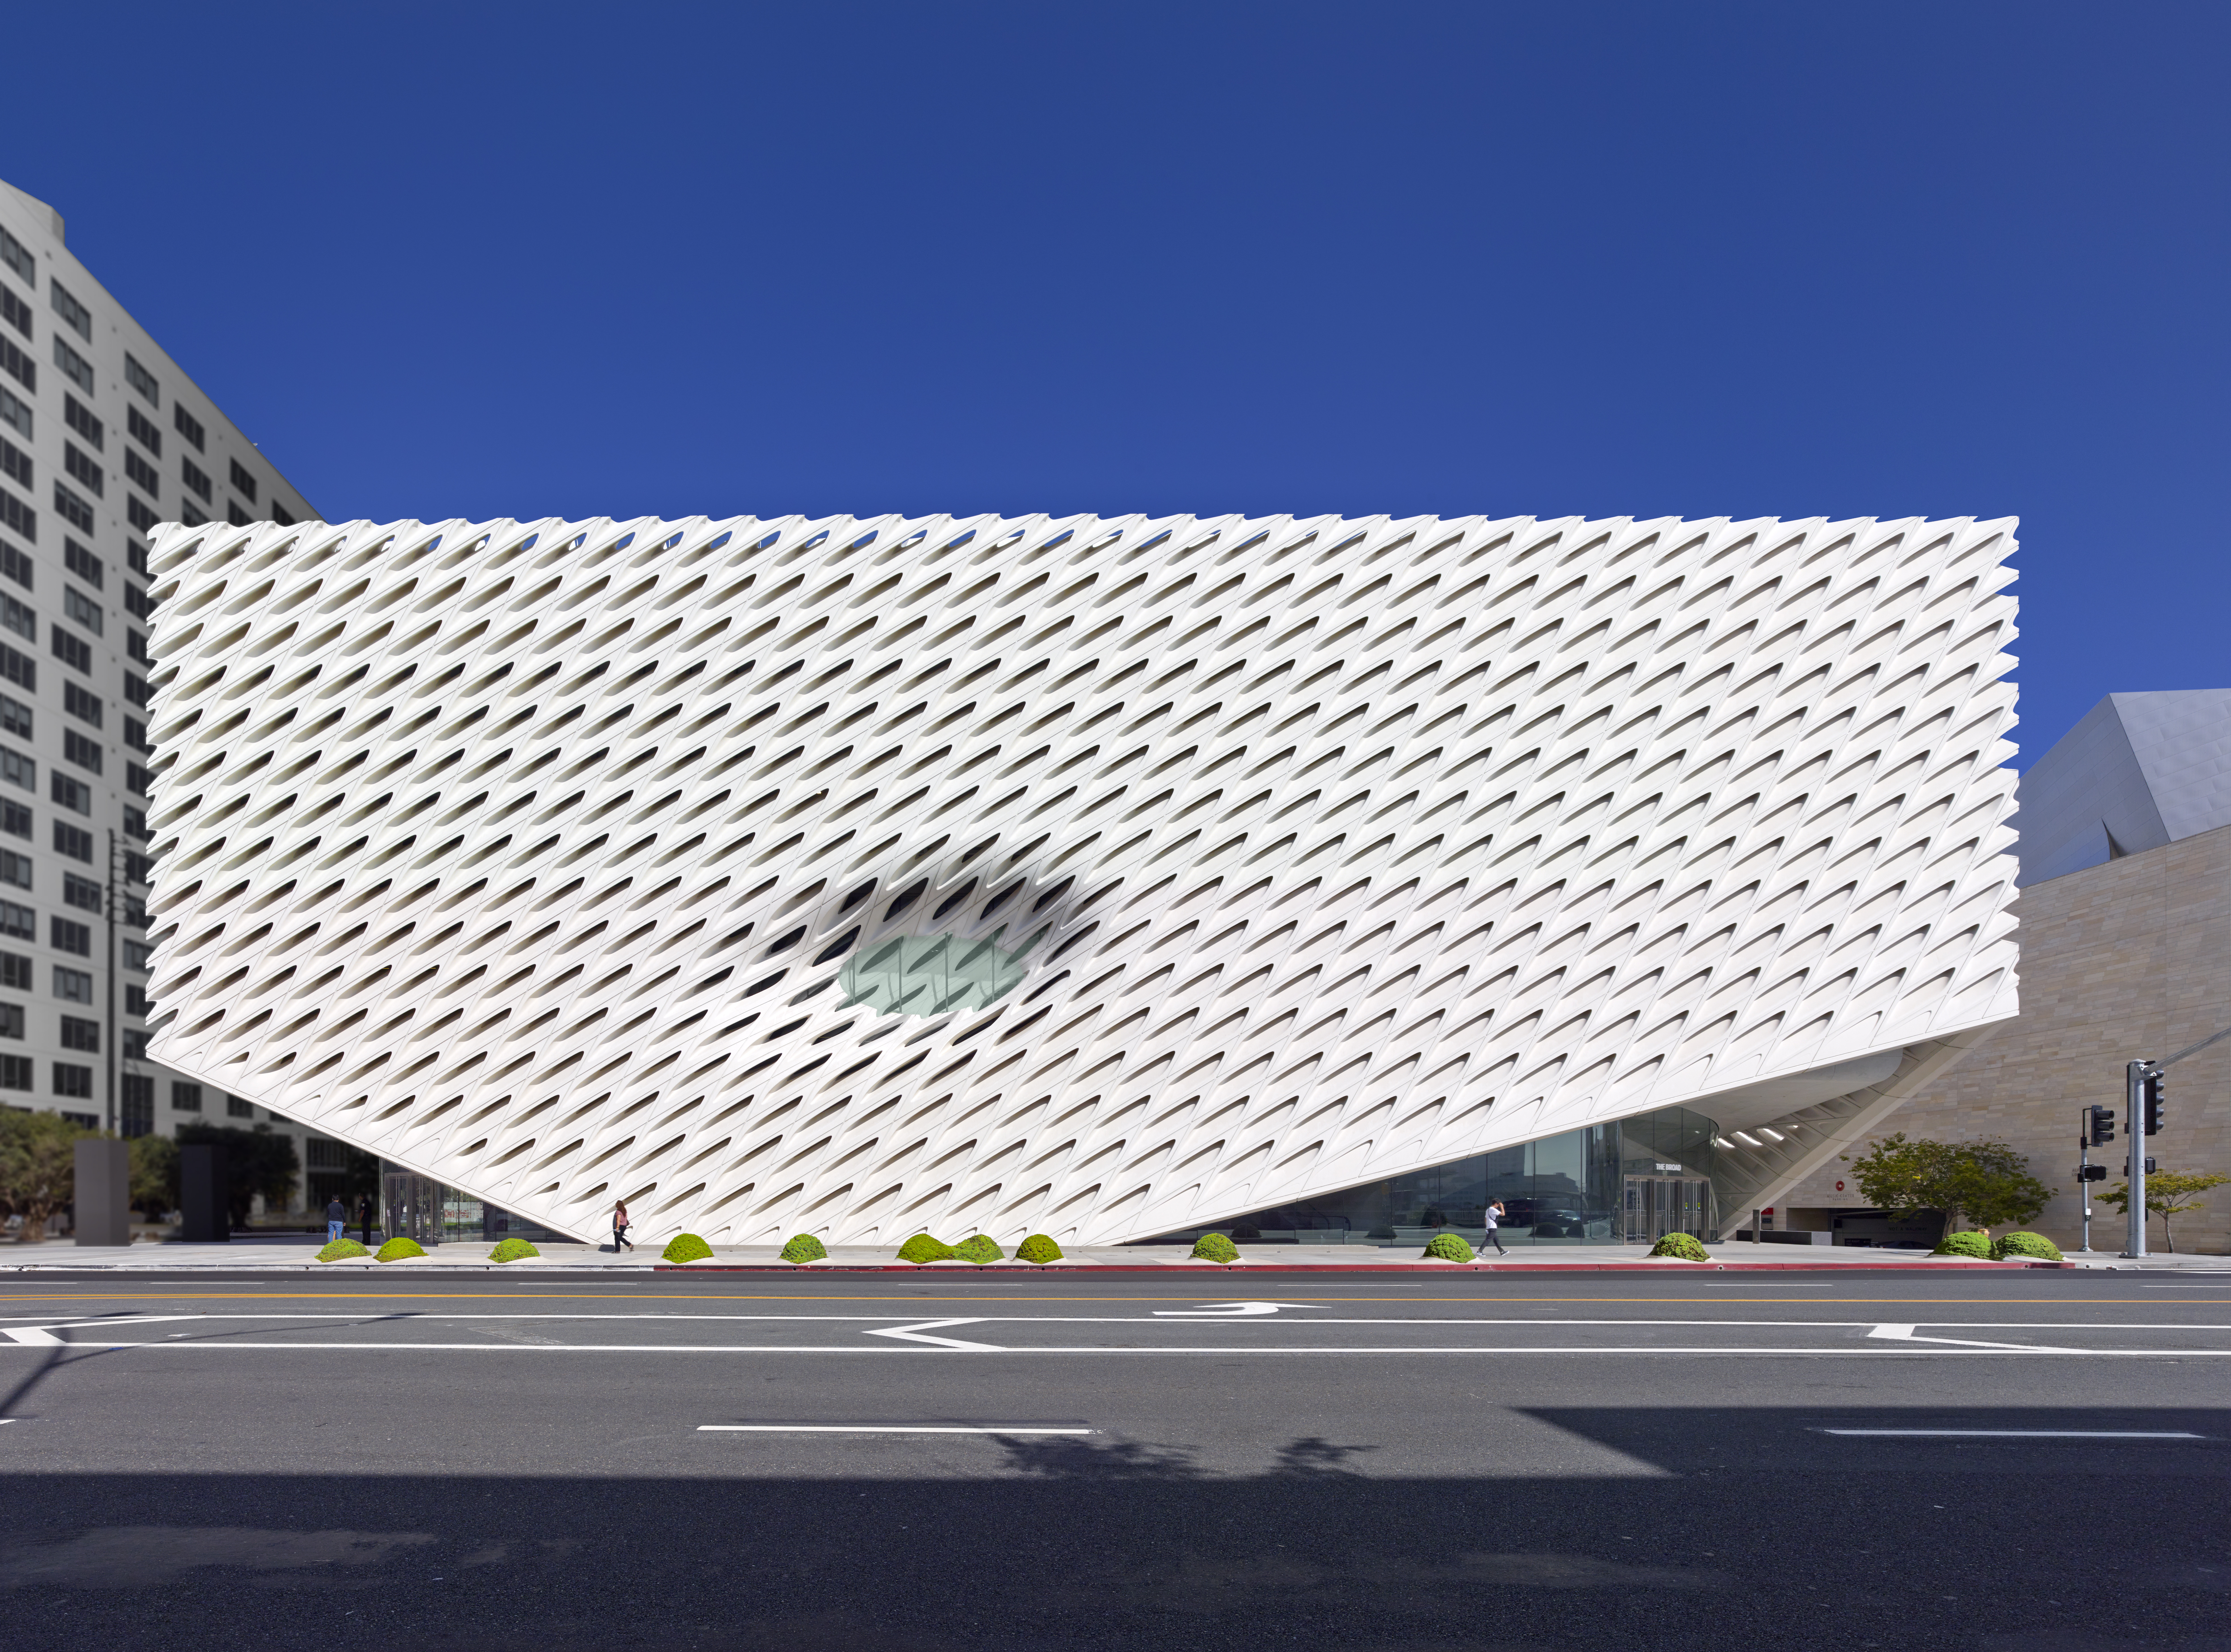 The Broad museum